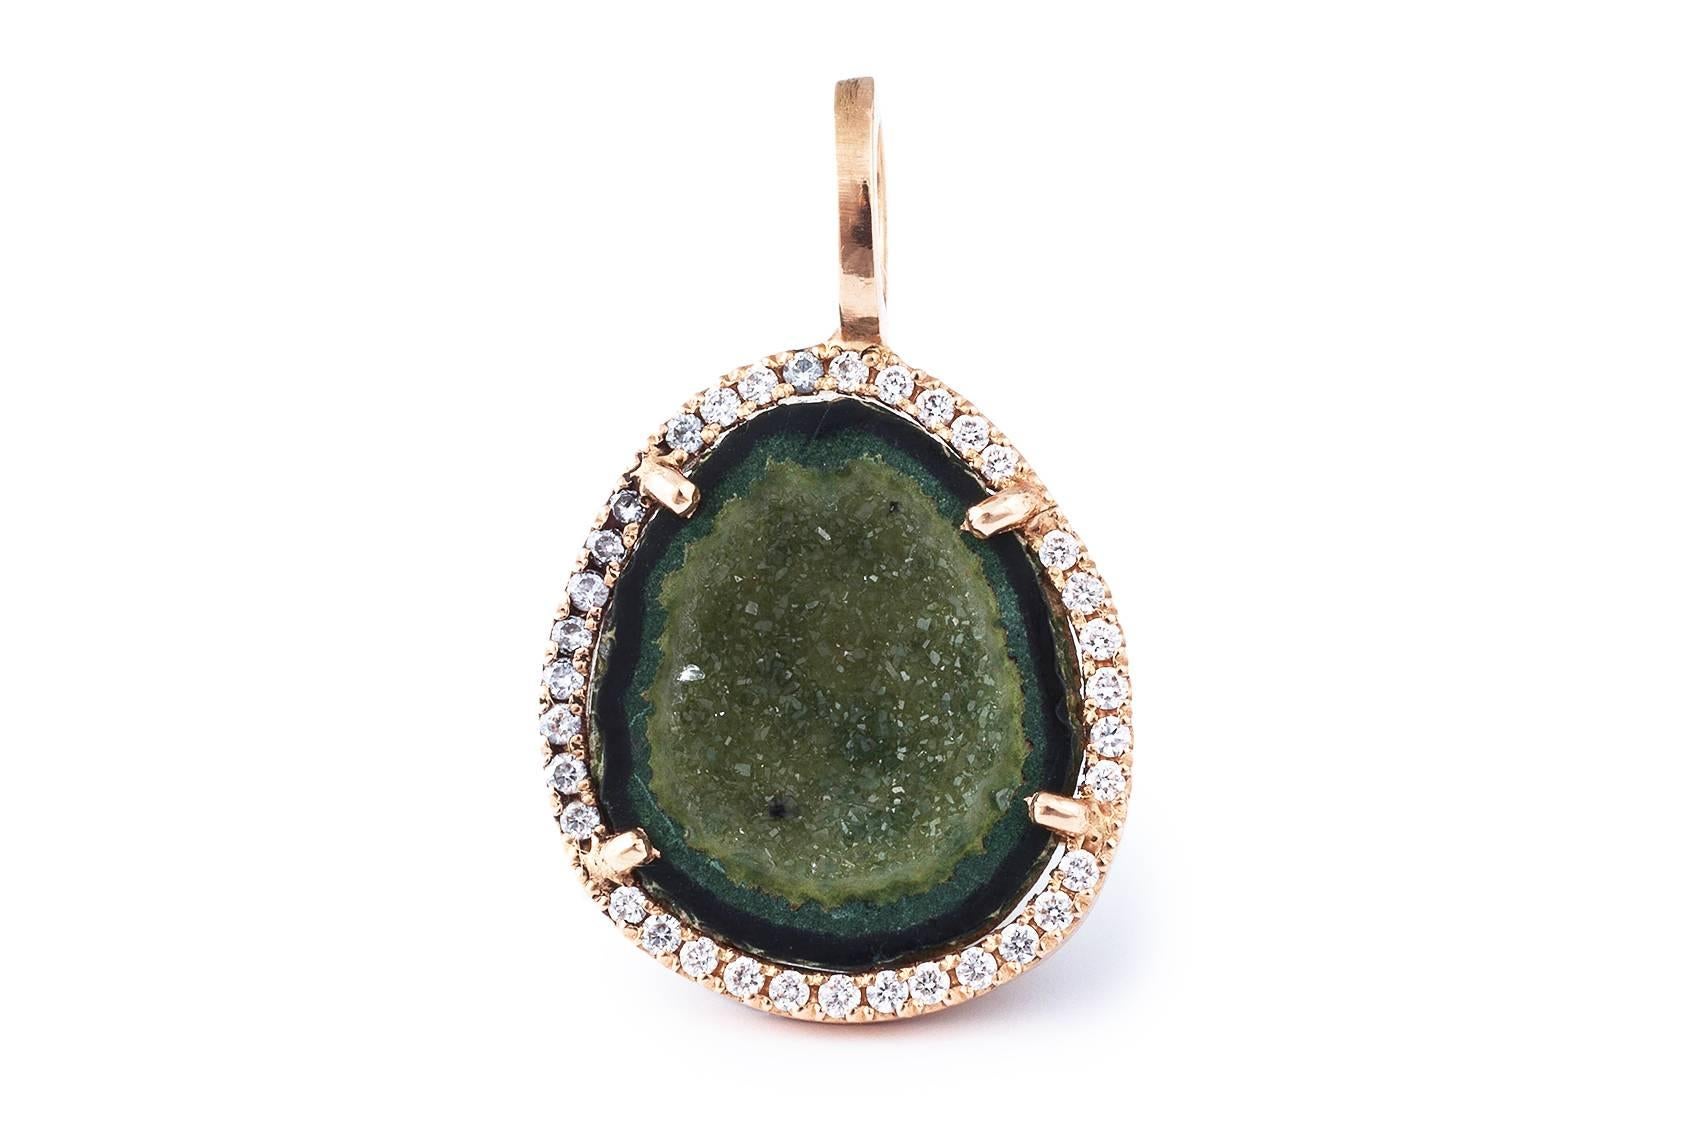 Green is one of my favorite colors, the designer says.
Next fashion trends are all about green!
This 18 k rose gold green agate geode pendant has 0.21 ct of dazzling diamonds.
This is the perfect gift for yourself or a special person.
Influencer